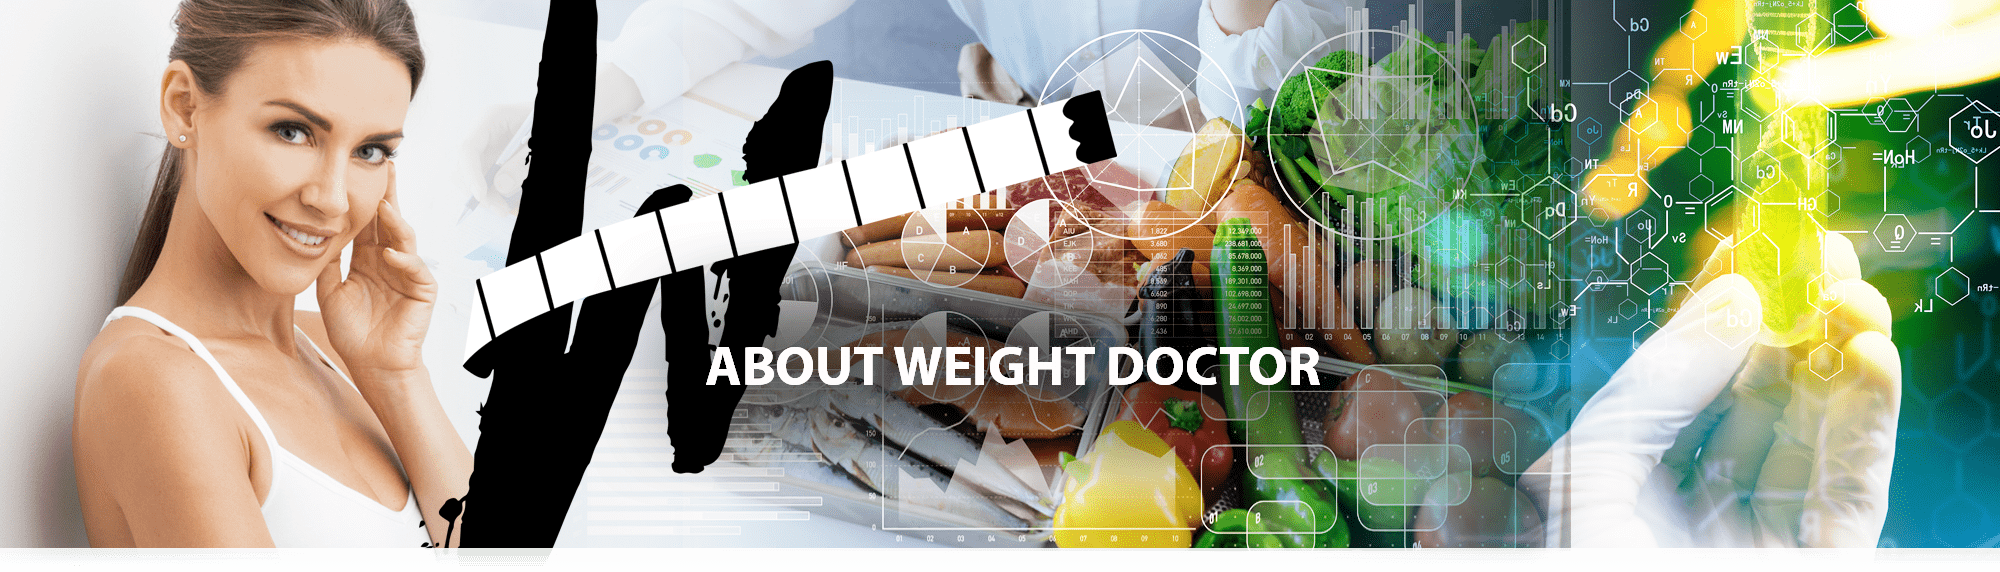 ABOUT WEIGHT DOCTOR